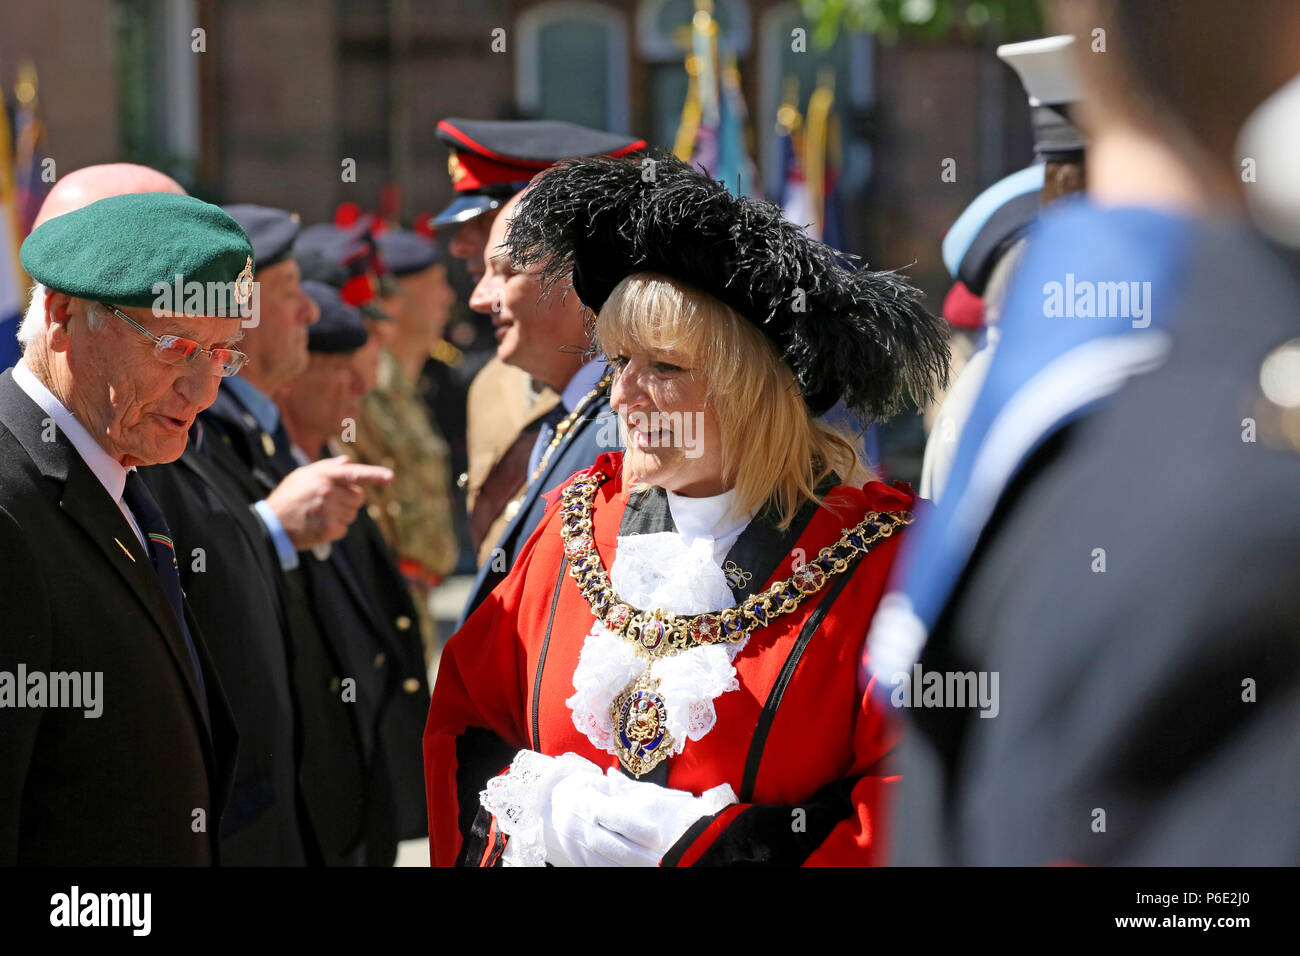 Manchester, UK, 30 June 2018. The Lord Mayor meets and talks to veterans during celebrations of Armed Forces Day where the public are given the opportunity to meet members of the armed forces and talk to them about the work they do, St Peters Square, Manchester, 30th June, 2018 (C)Barbara Cook/Alamy Live News Stock Photo